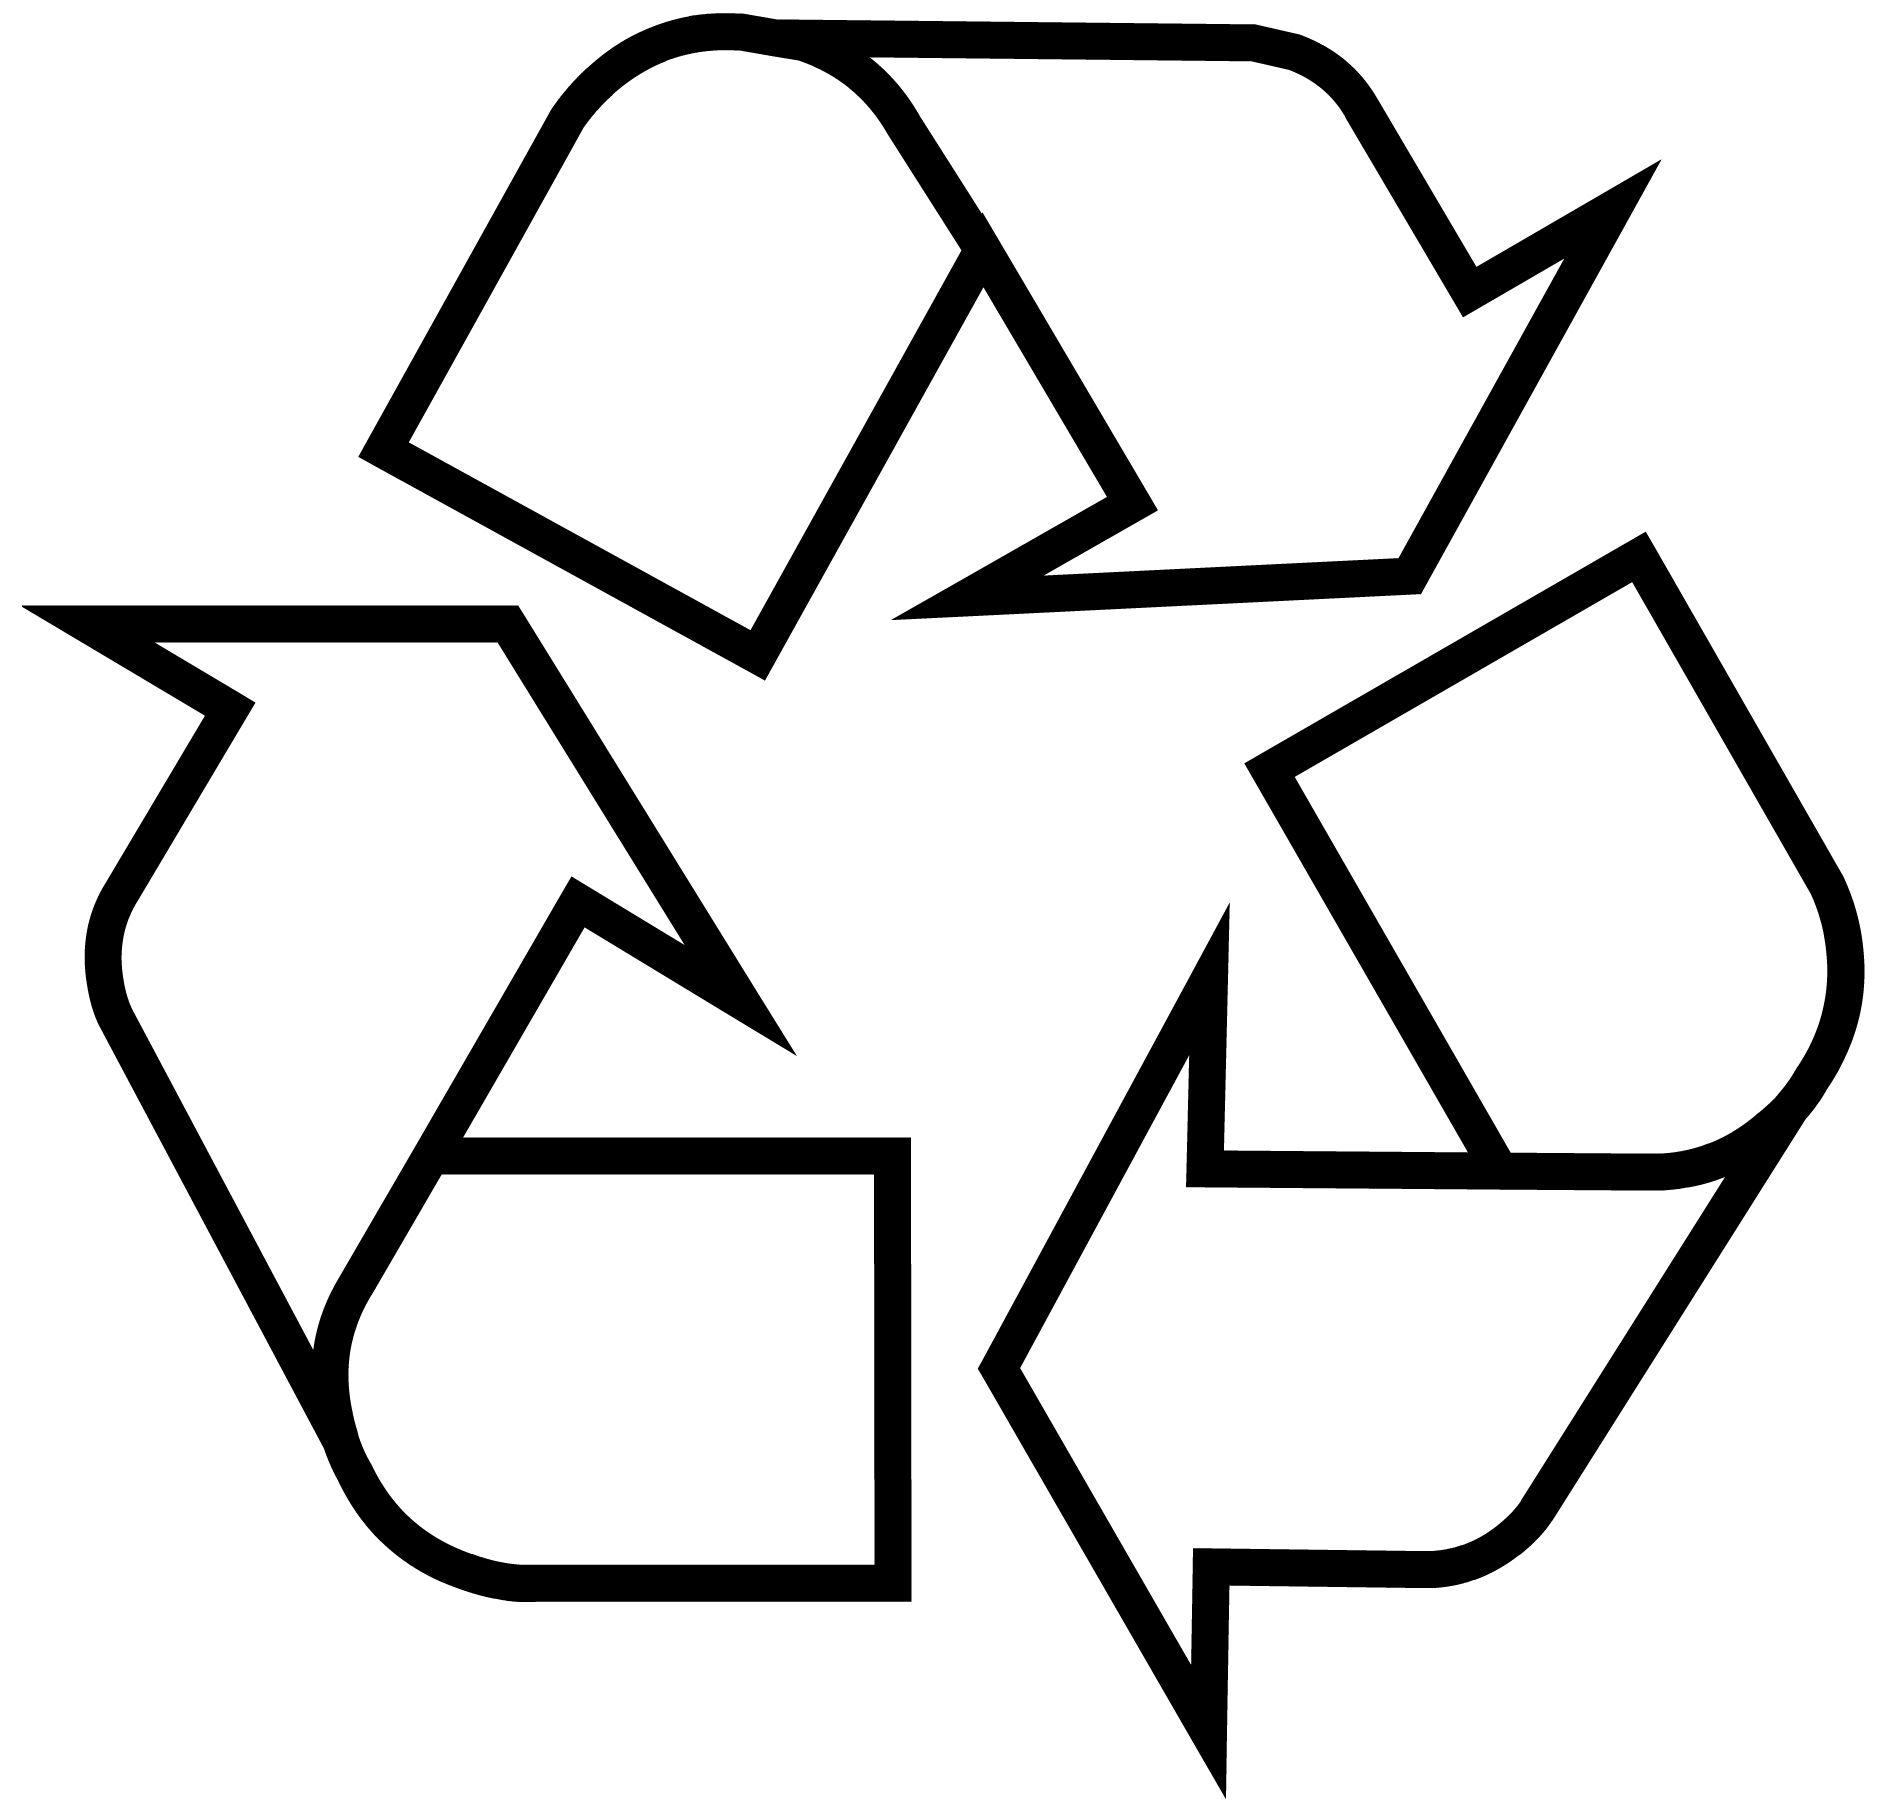 Black and White Recycle Logo - Recycling Symbol - Download the Original Recycle Logo